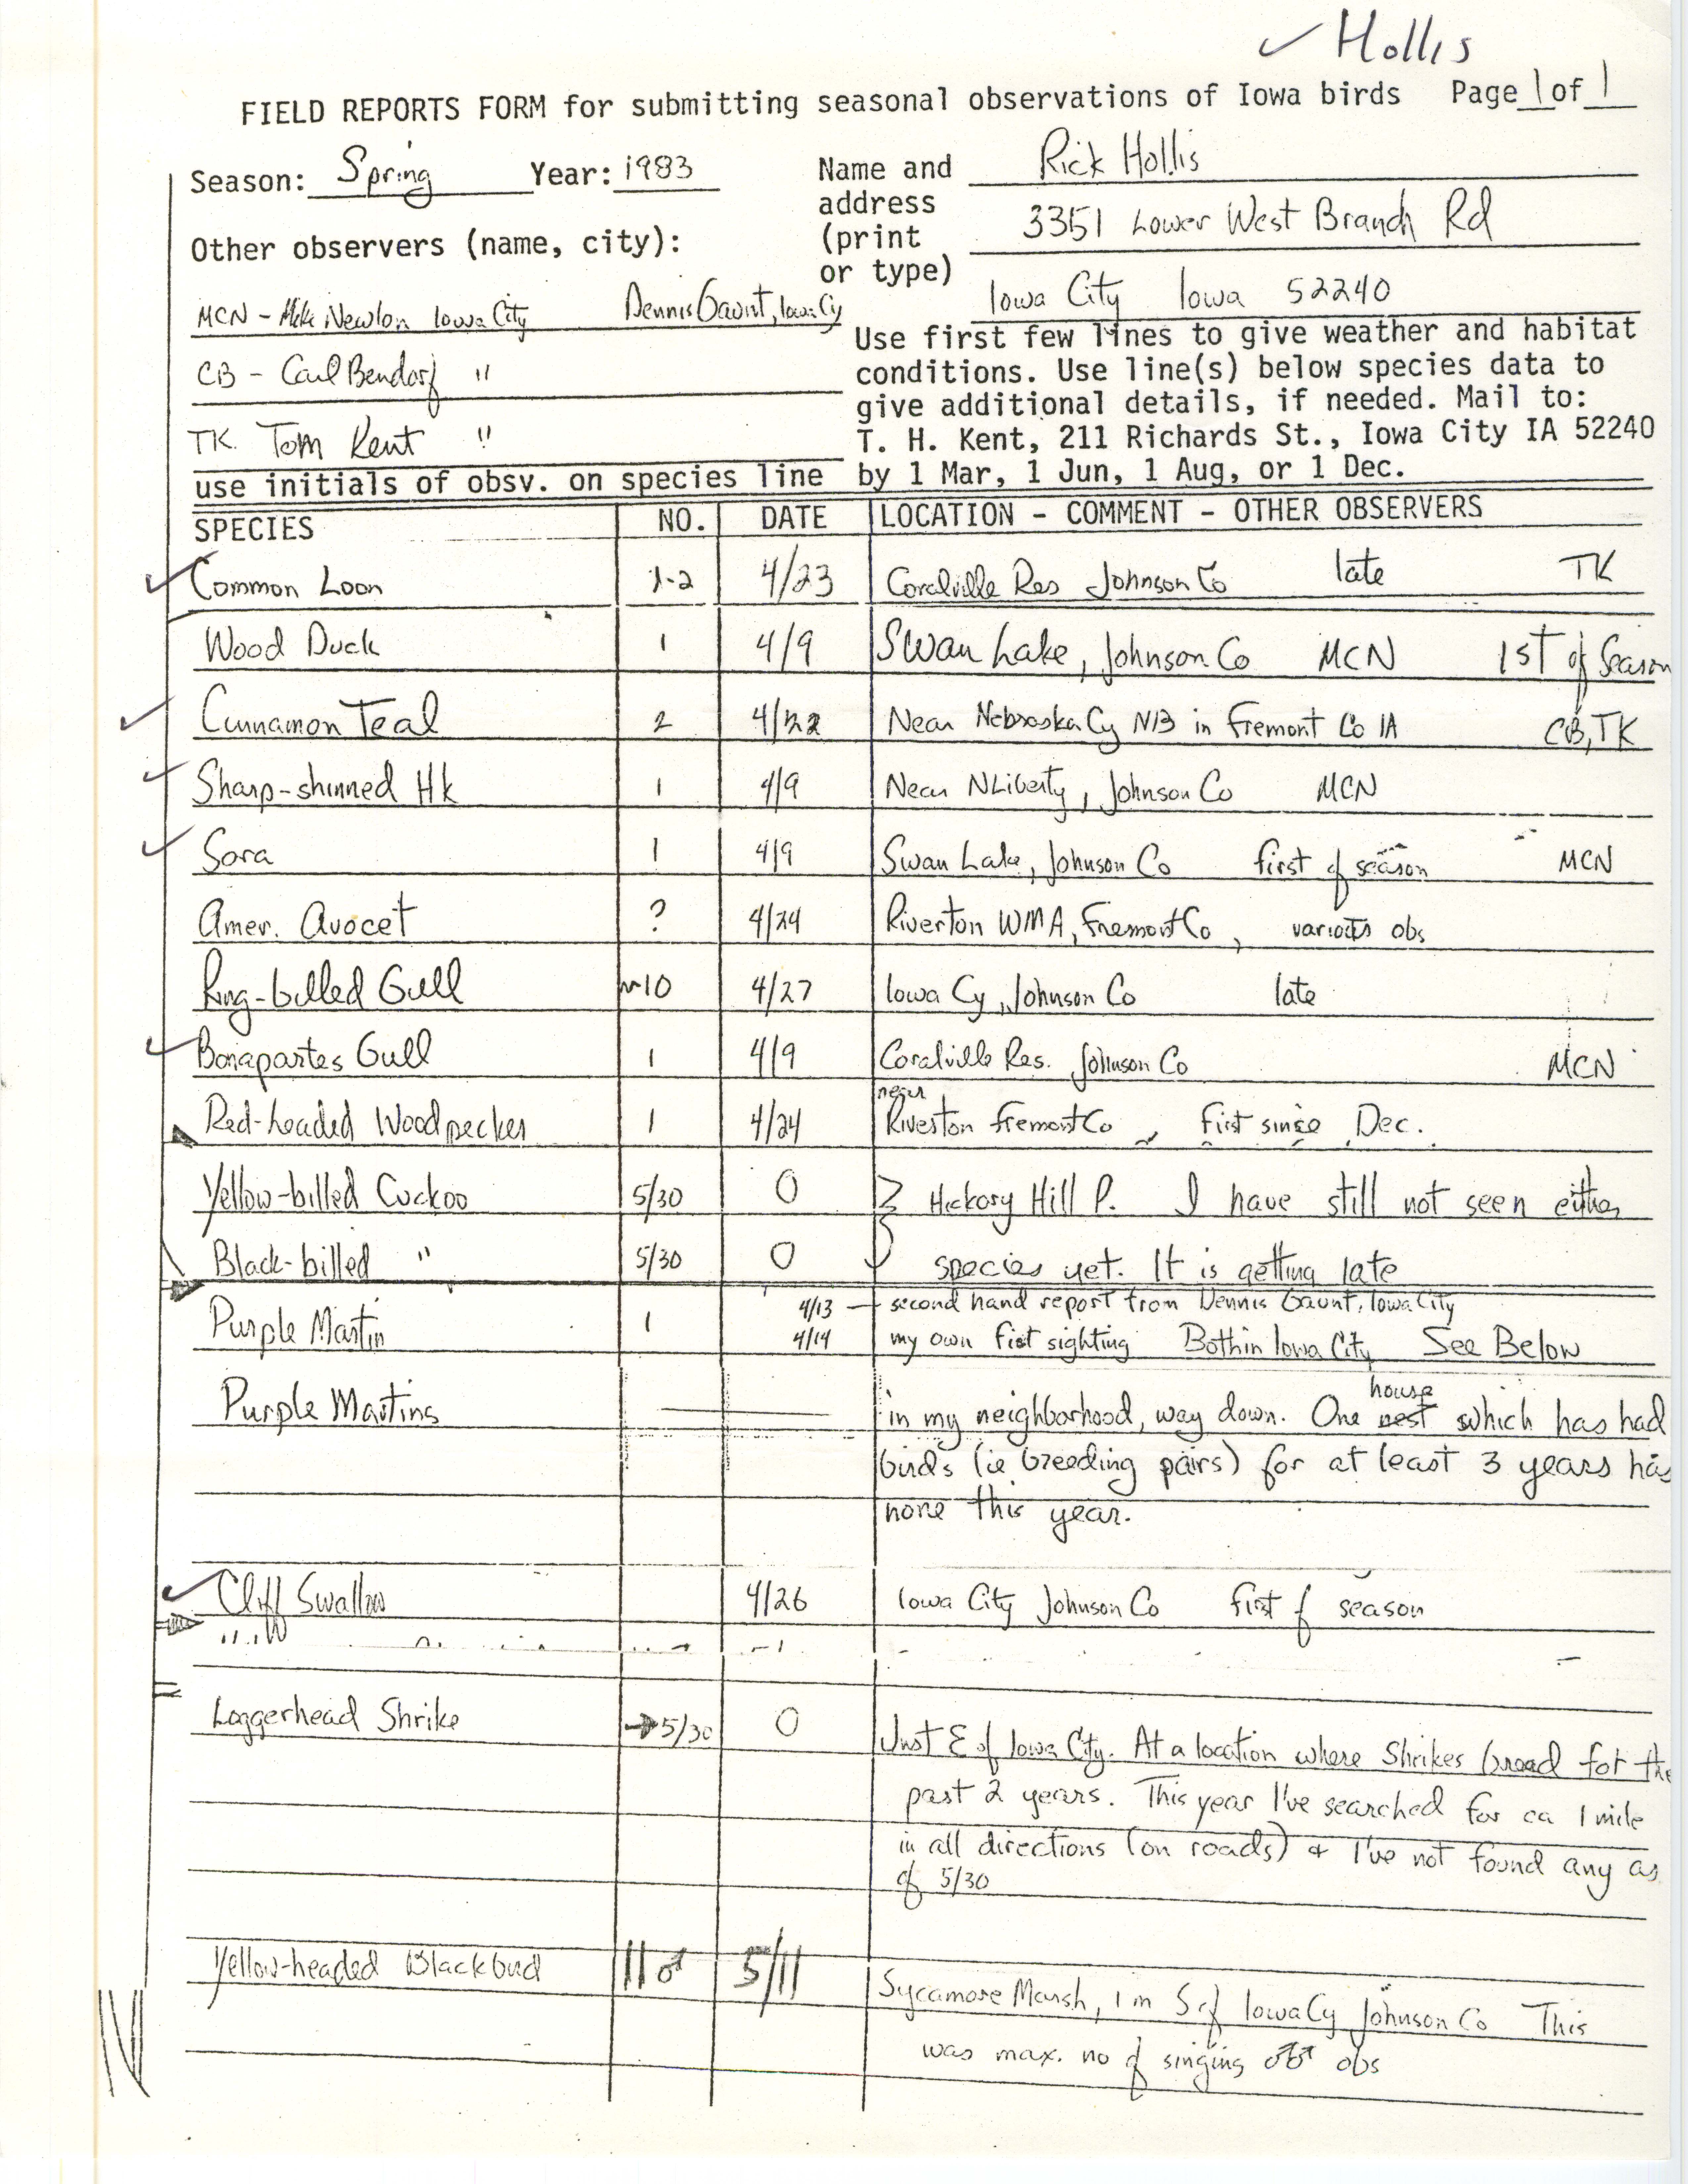 Field reports form for submitting seasonal observations of Iowa birds, Richard Jule Hollis, spring 1983